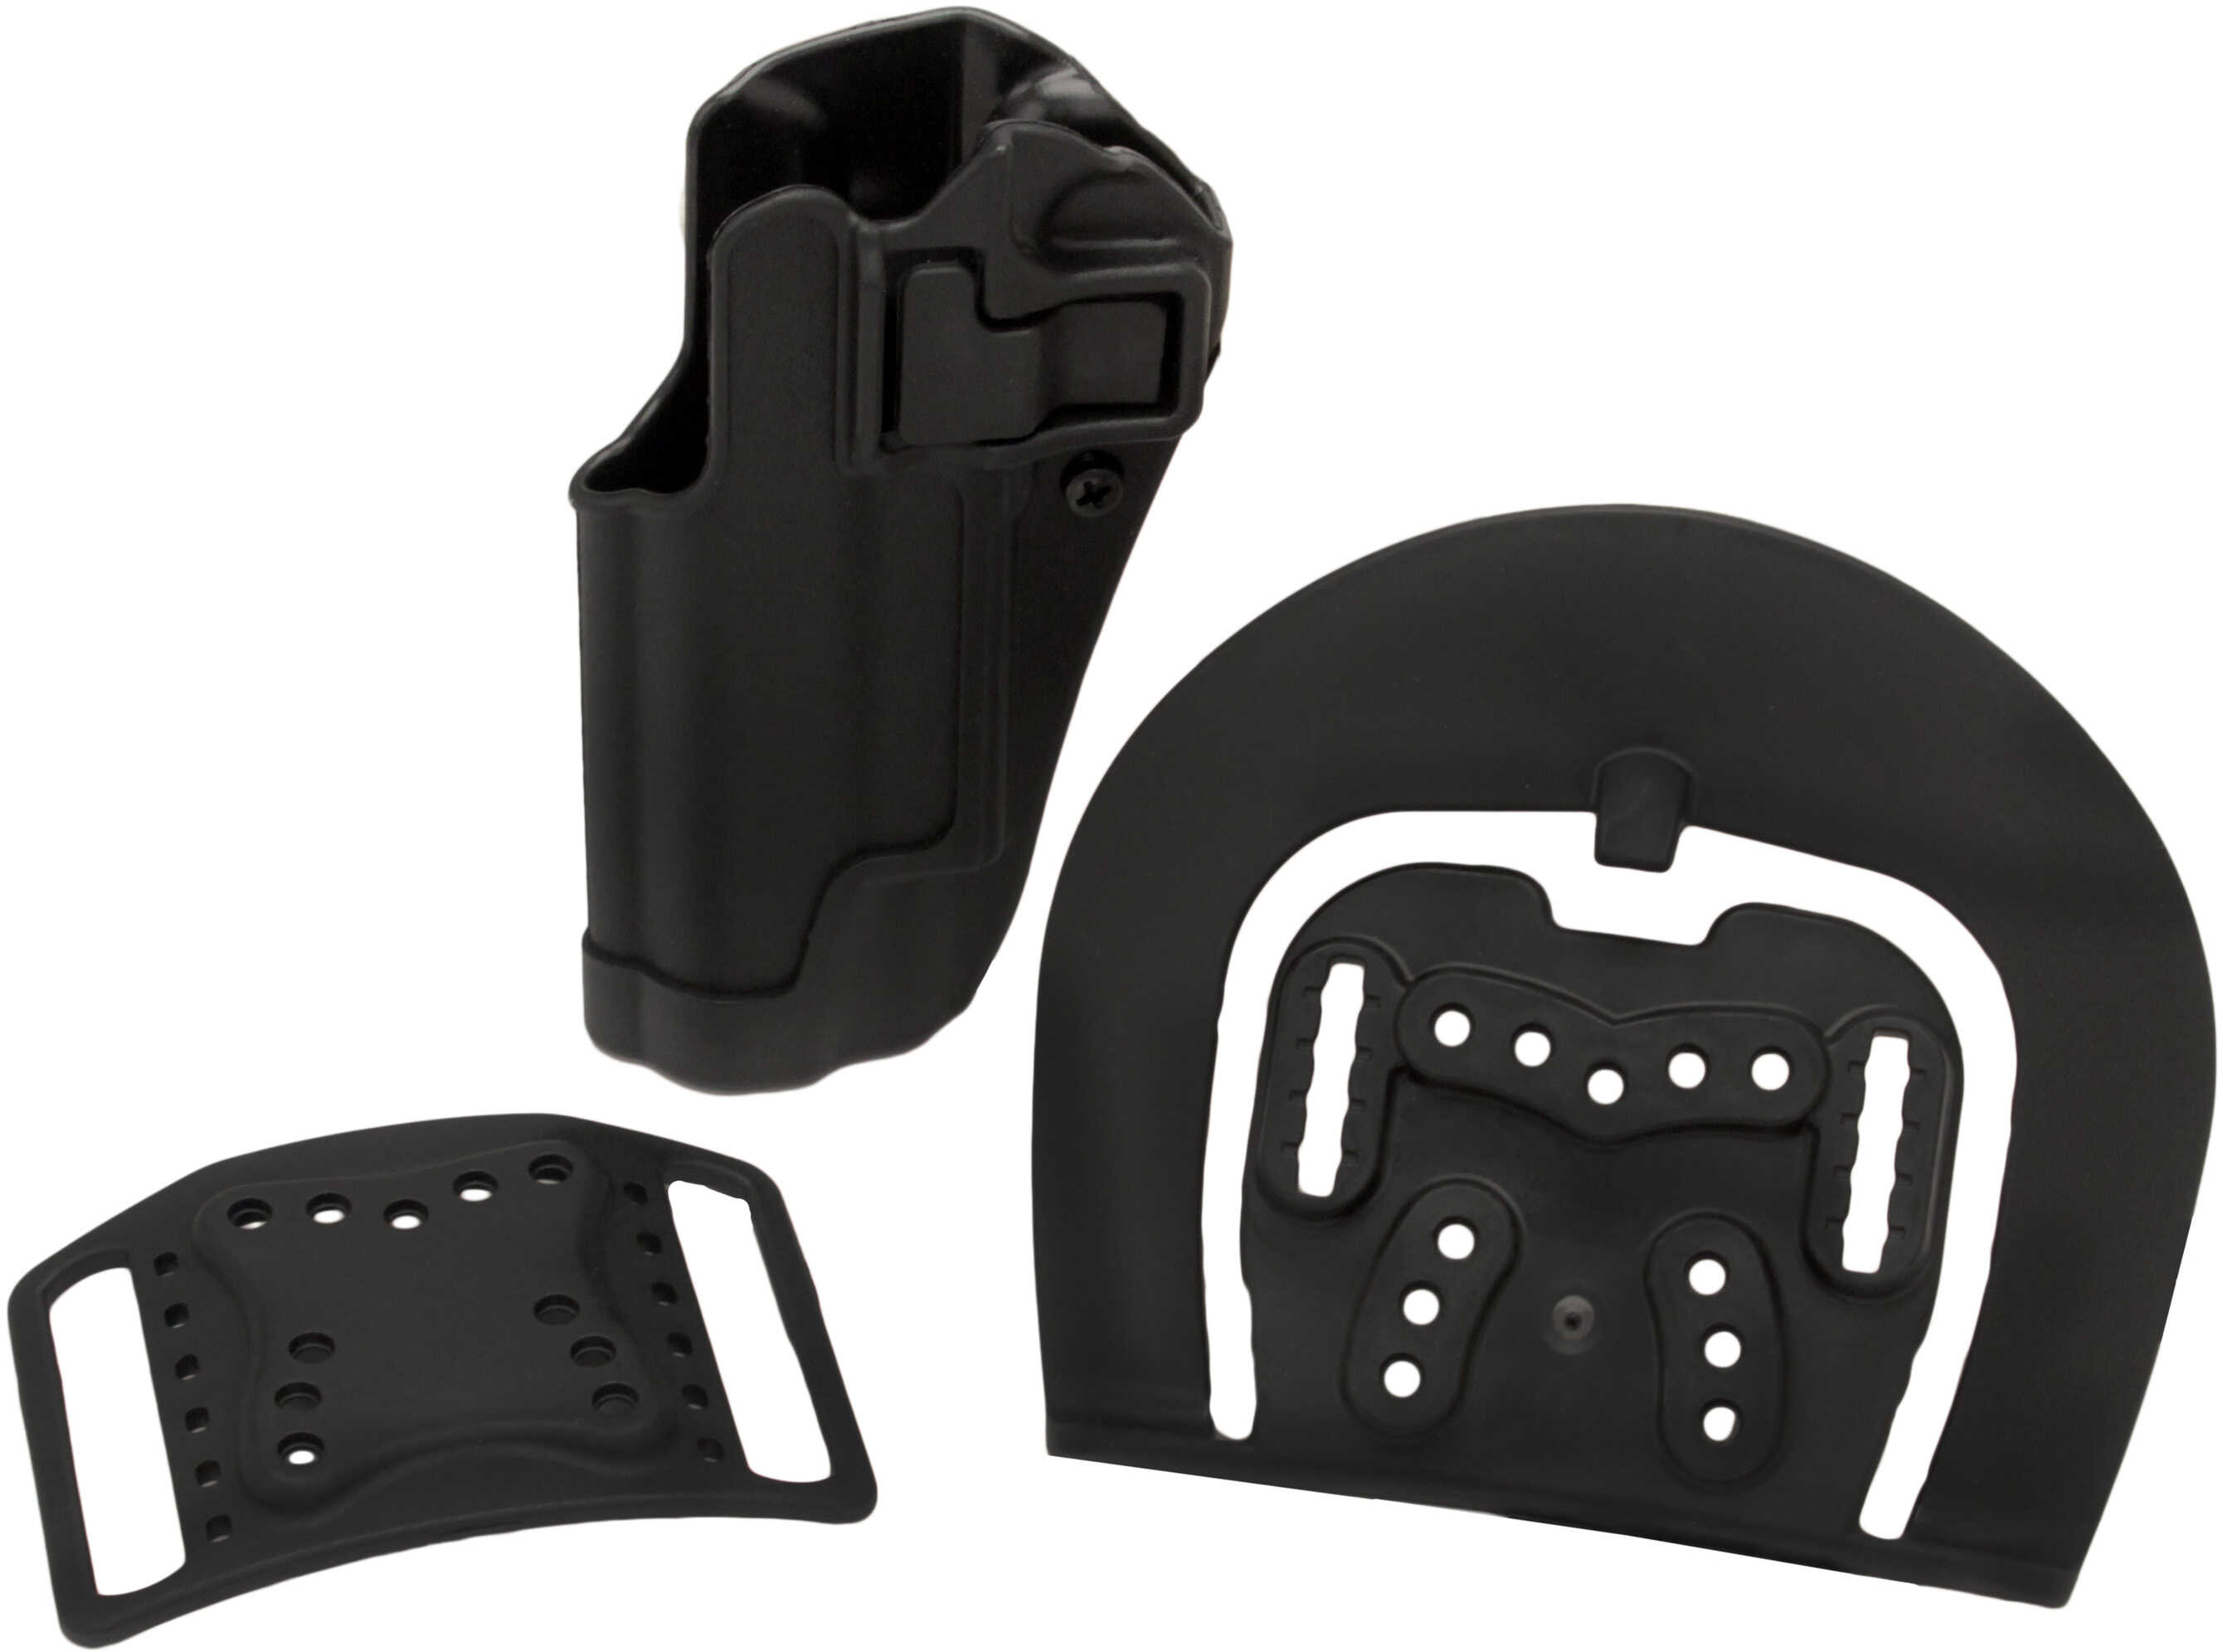 BLACKHAWK! CQC SERPA Holster With Belt and Paddle Attachment Fits Colt Government Left Hand 410503BK-L